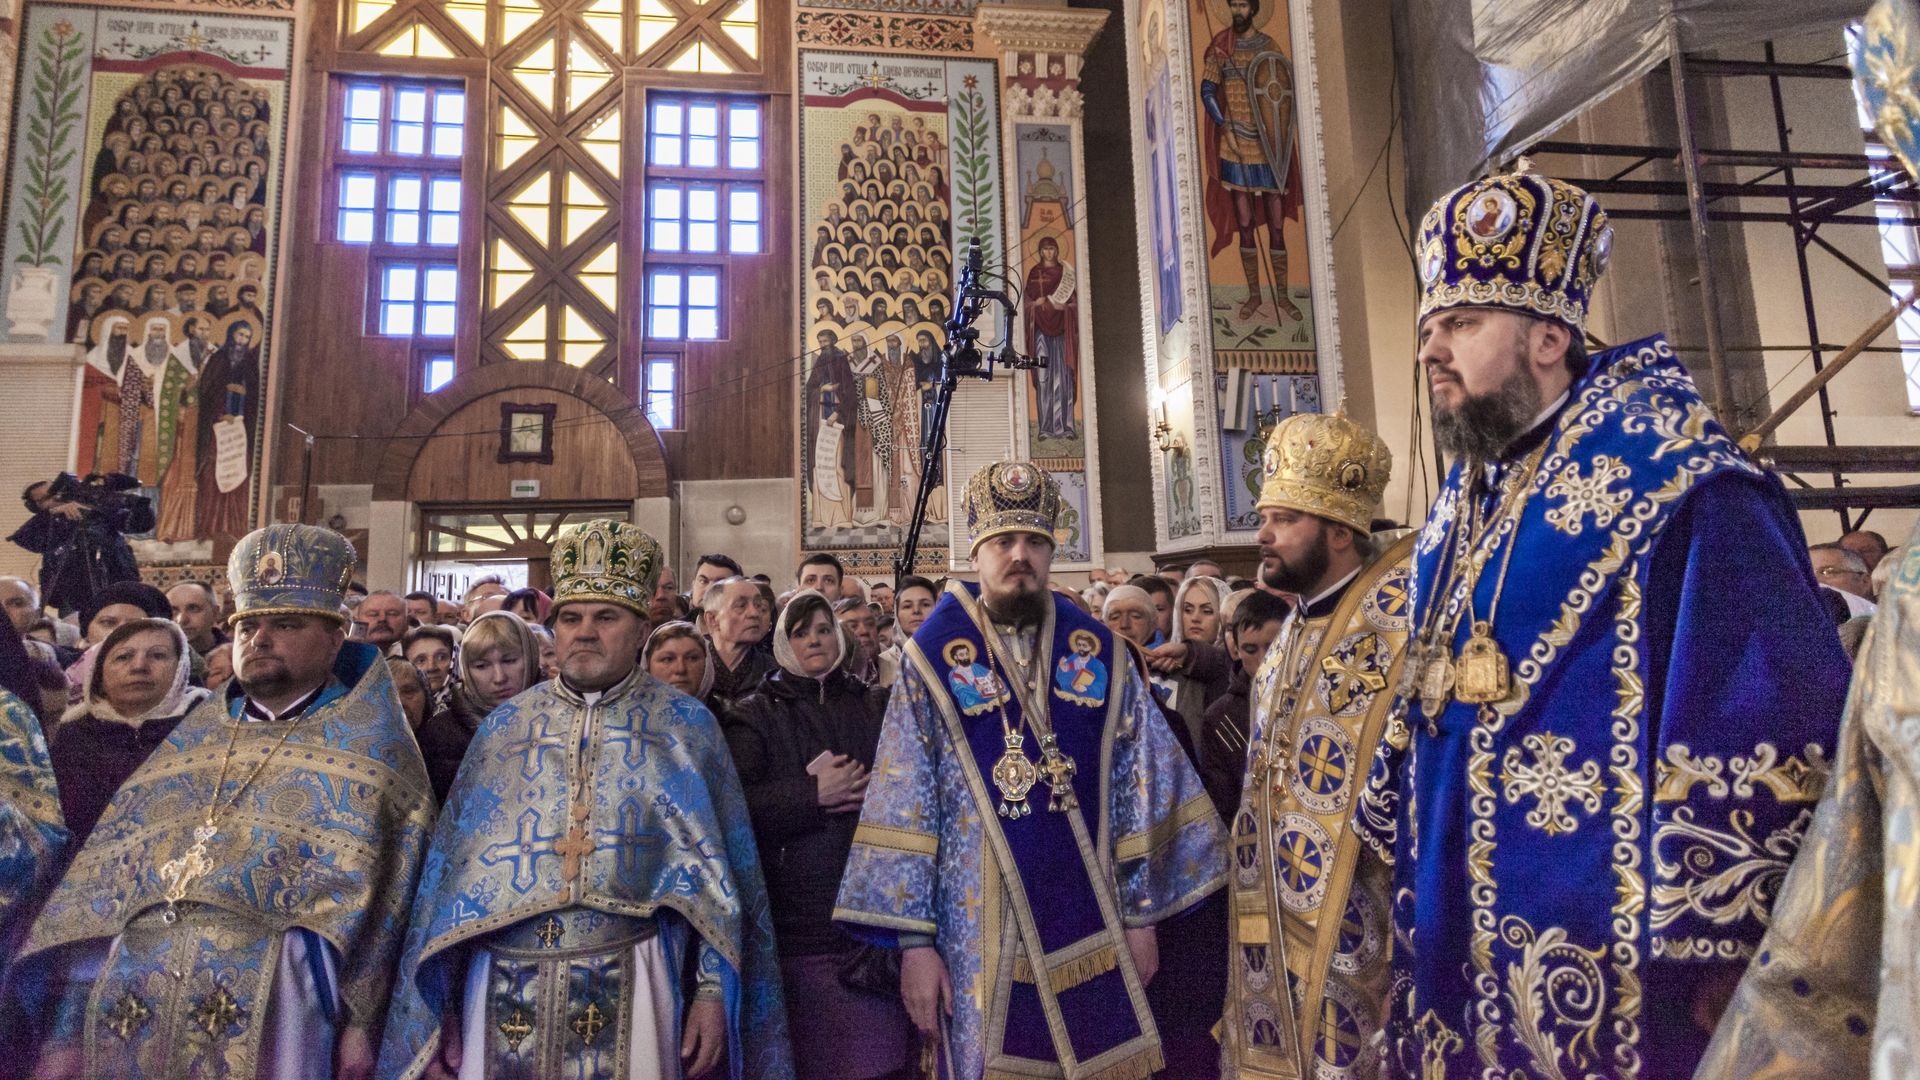 Metropolitan Epiphanius I (right), head of the Orthodox Church of Ukraine, with other priests in Rivne, Ukraine, in 2019.